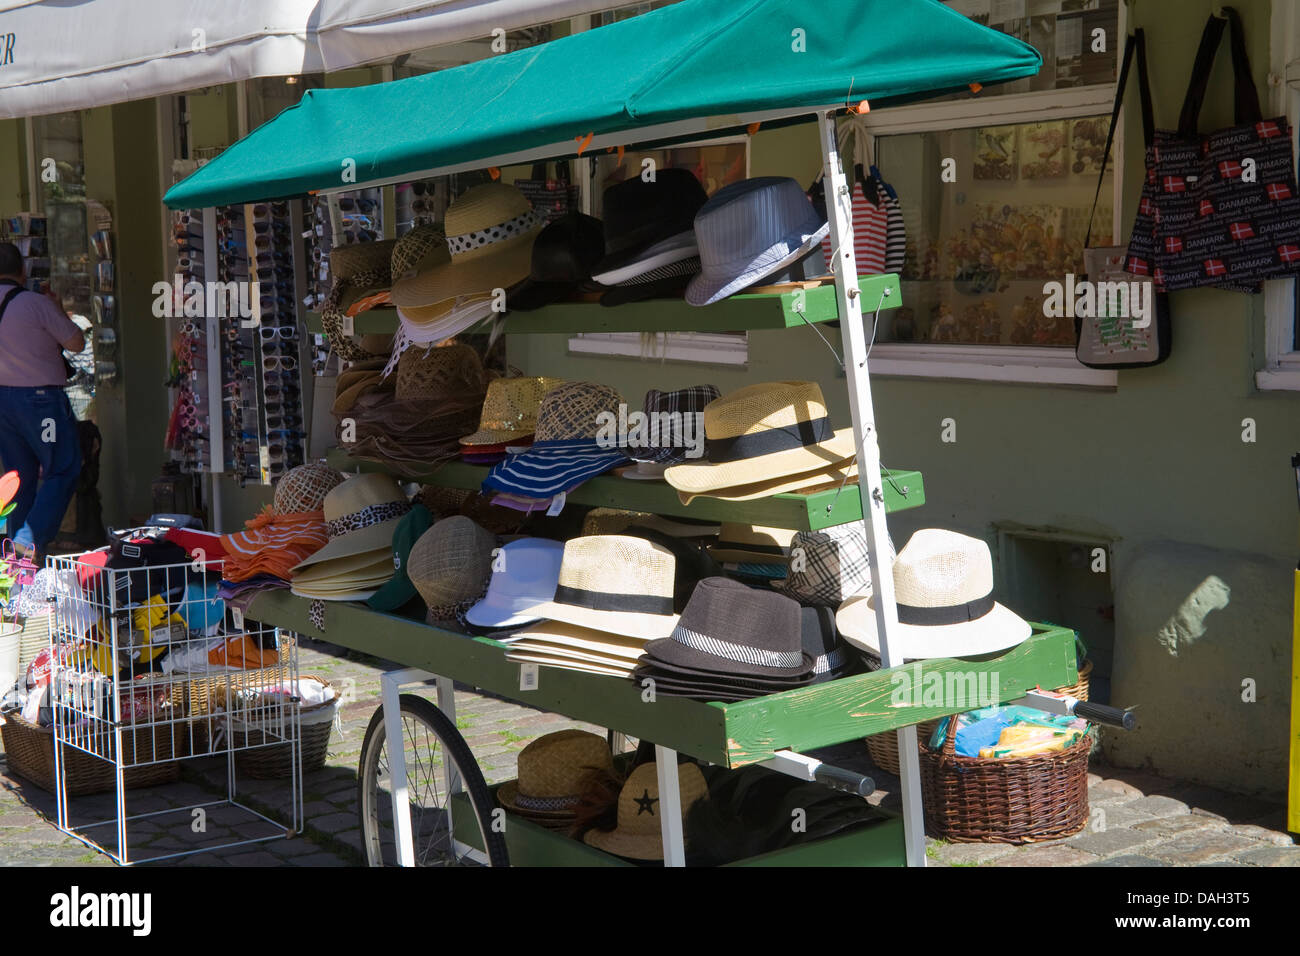 The Old Umbrella Shop High Resolution Stock Photography and Images - Alamy